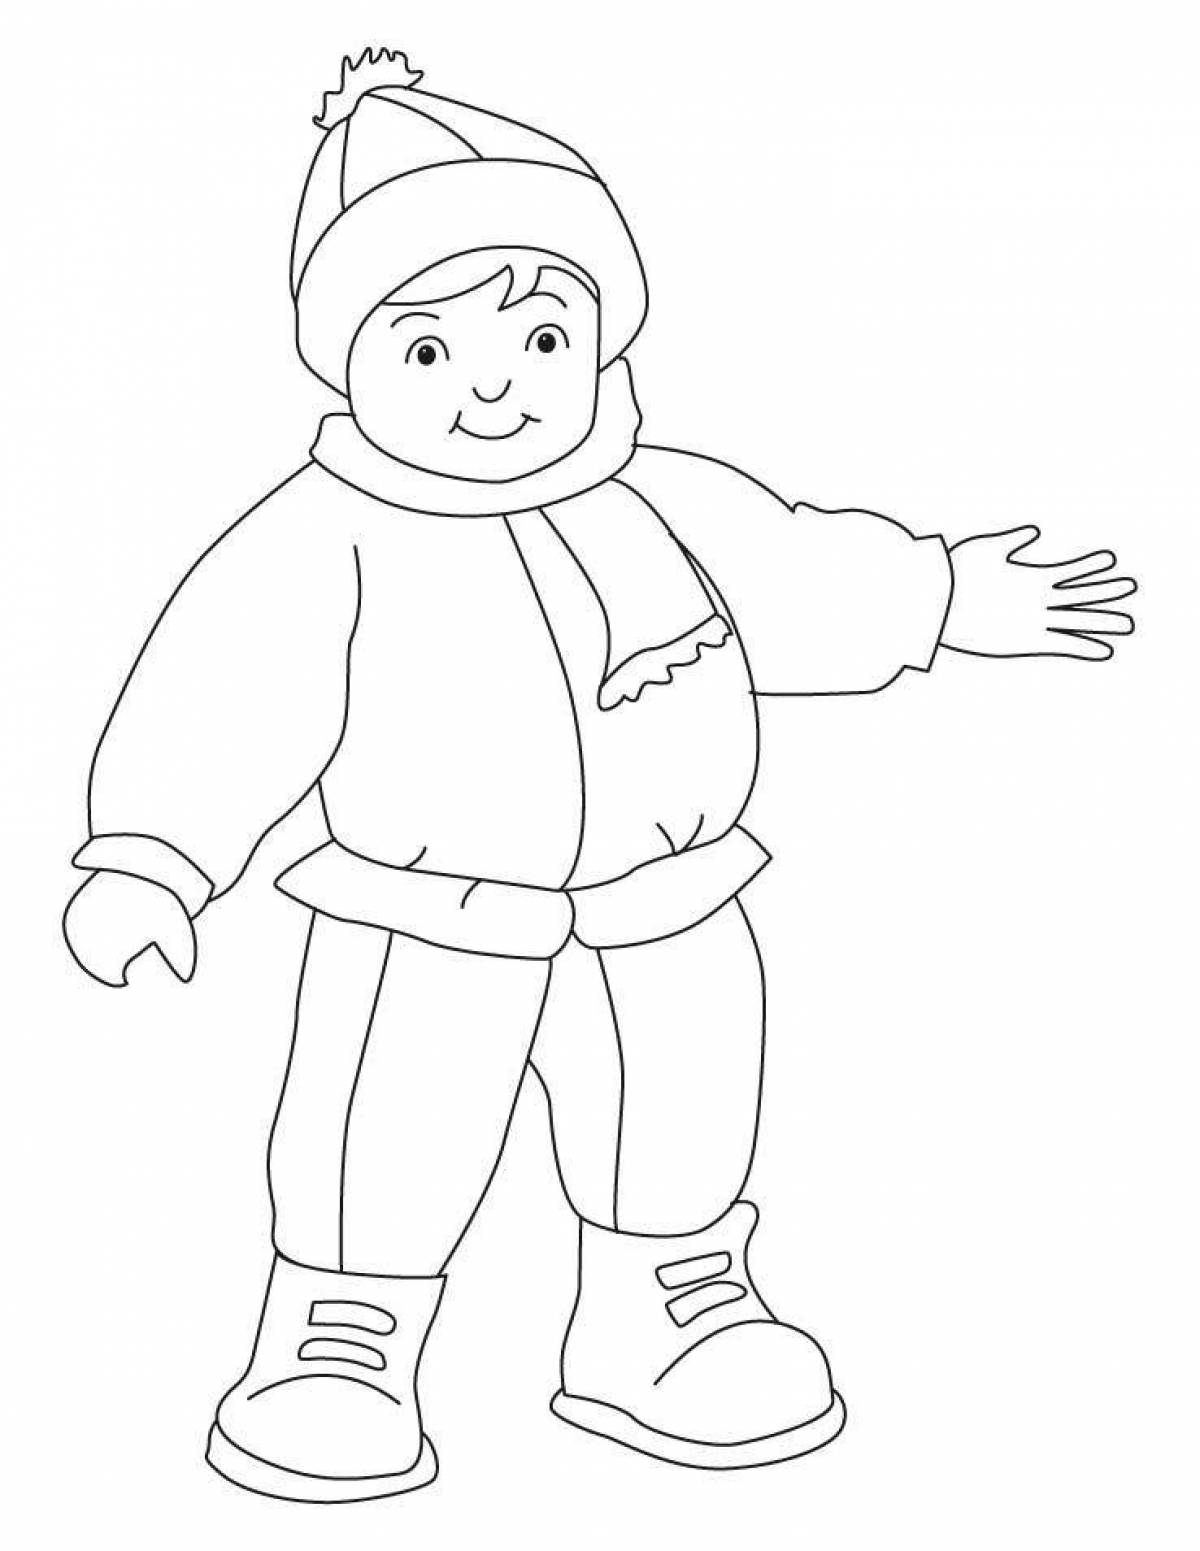 Snuggly coloring page boy in winter clothes